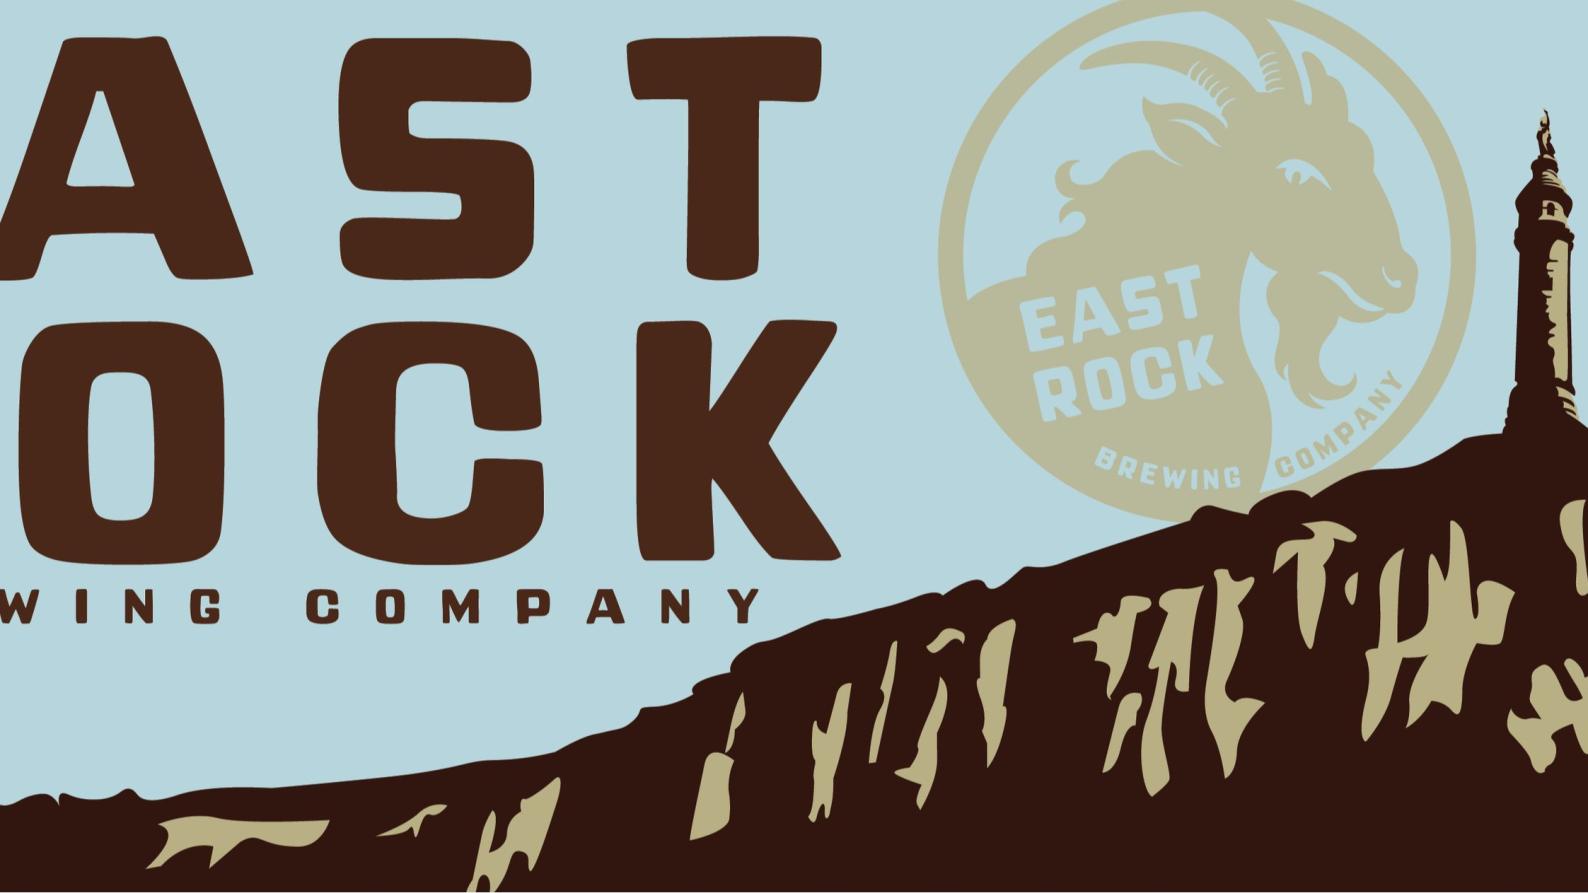 East_Rock_Brewing_Company_1695609384 BISTRO BUDDY - FOOD & DRINK NETWORK - A COMMUNITY-DRIVEN PLATFORM THAT EMPOWERS GROWTH THROUGH TECHNOLOGY & LOCAL COLLABORATION  Discover and support your local food and drink event scene on the ultimate platform for foodies. Connect & collaborate with local restaurants, food trucks, farmers' markets, breweries, wineries, and more. Featuring digital menus with online ordering & zero commissions, businesses can promote deals, merchandise, events, and jobs. Subscribe & stay up-to-date with local and industry news and trends from local food and drink influencers and creators.